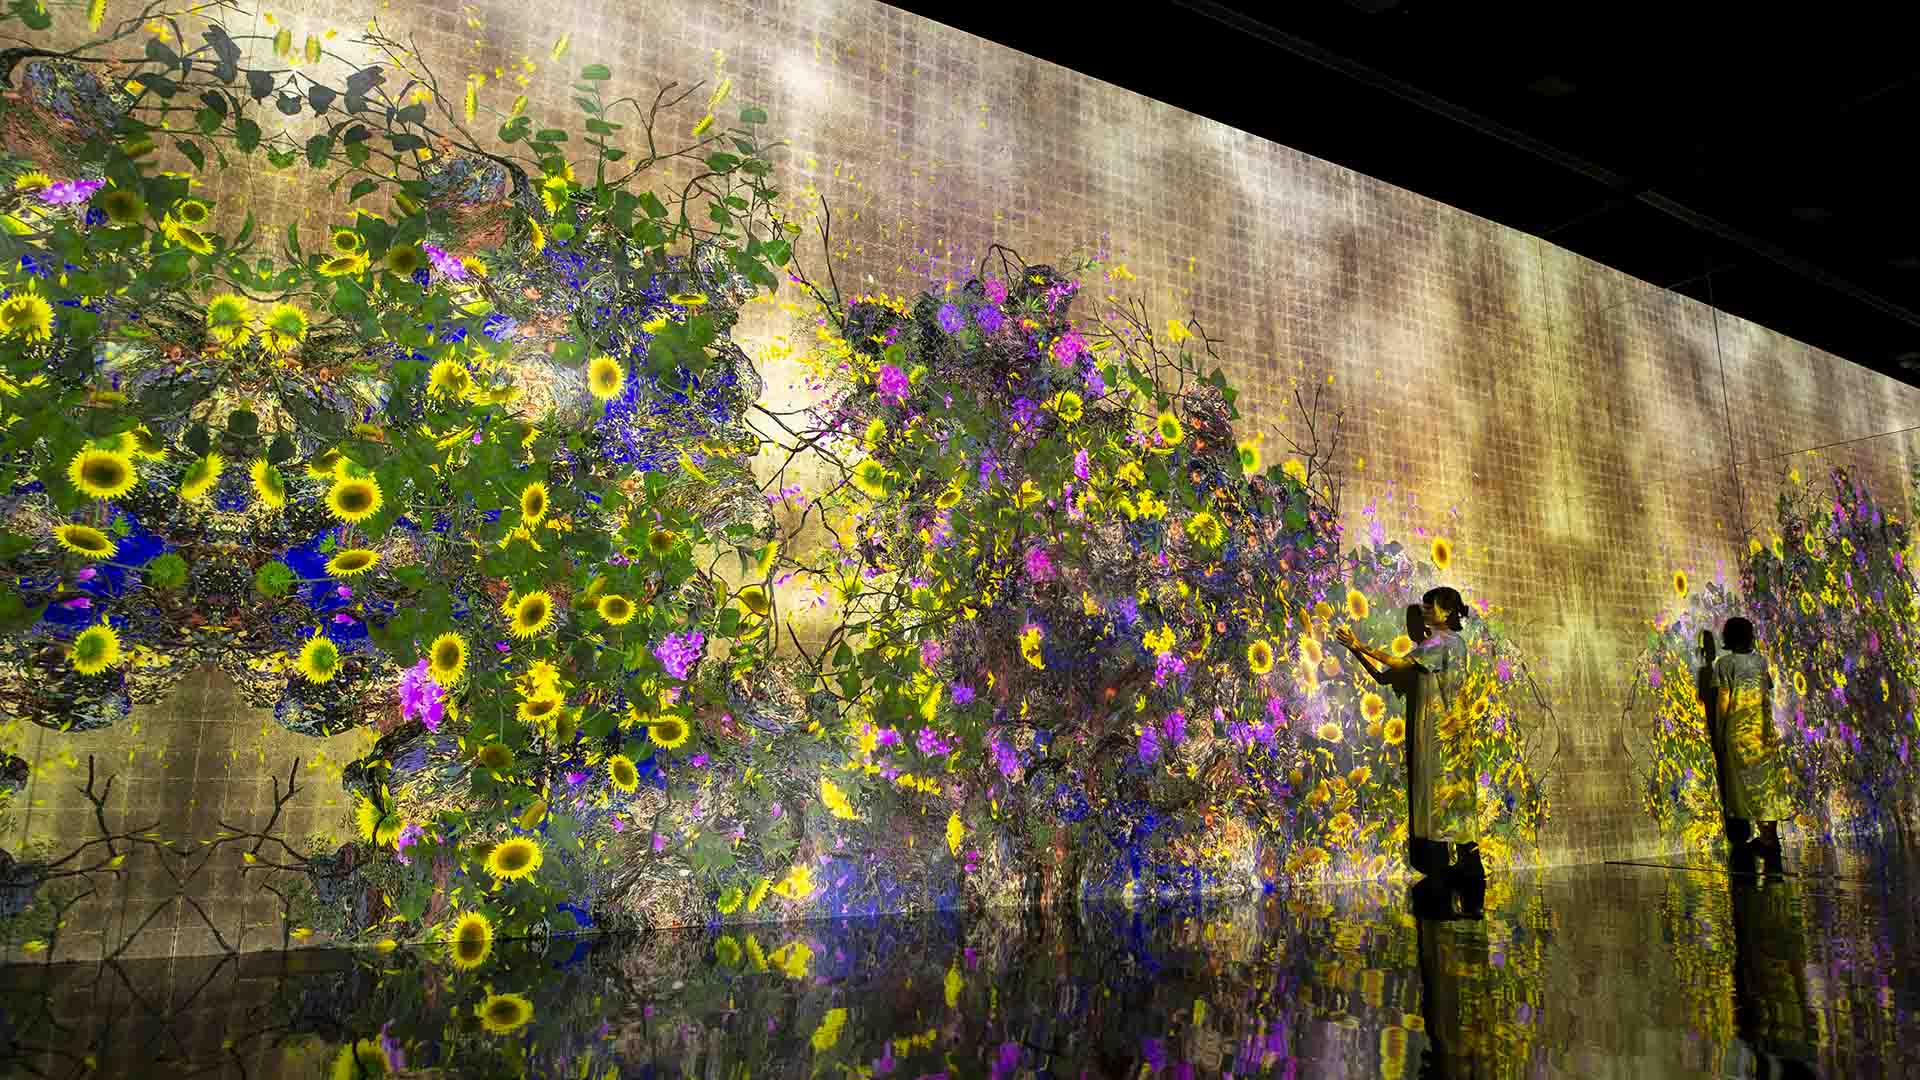 Teamlab Is Opening Another Vivid and Kaleidoscopic Digital-Only Art Museum